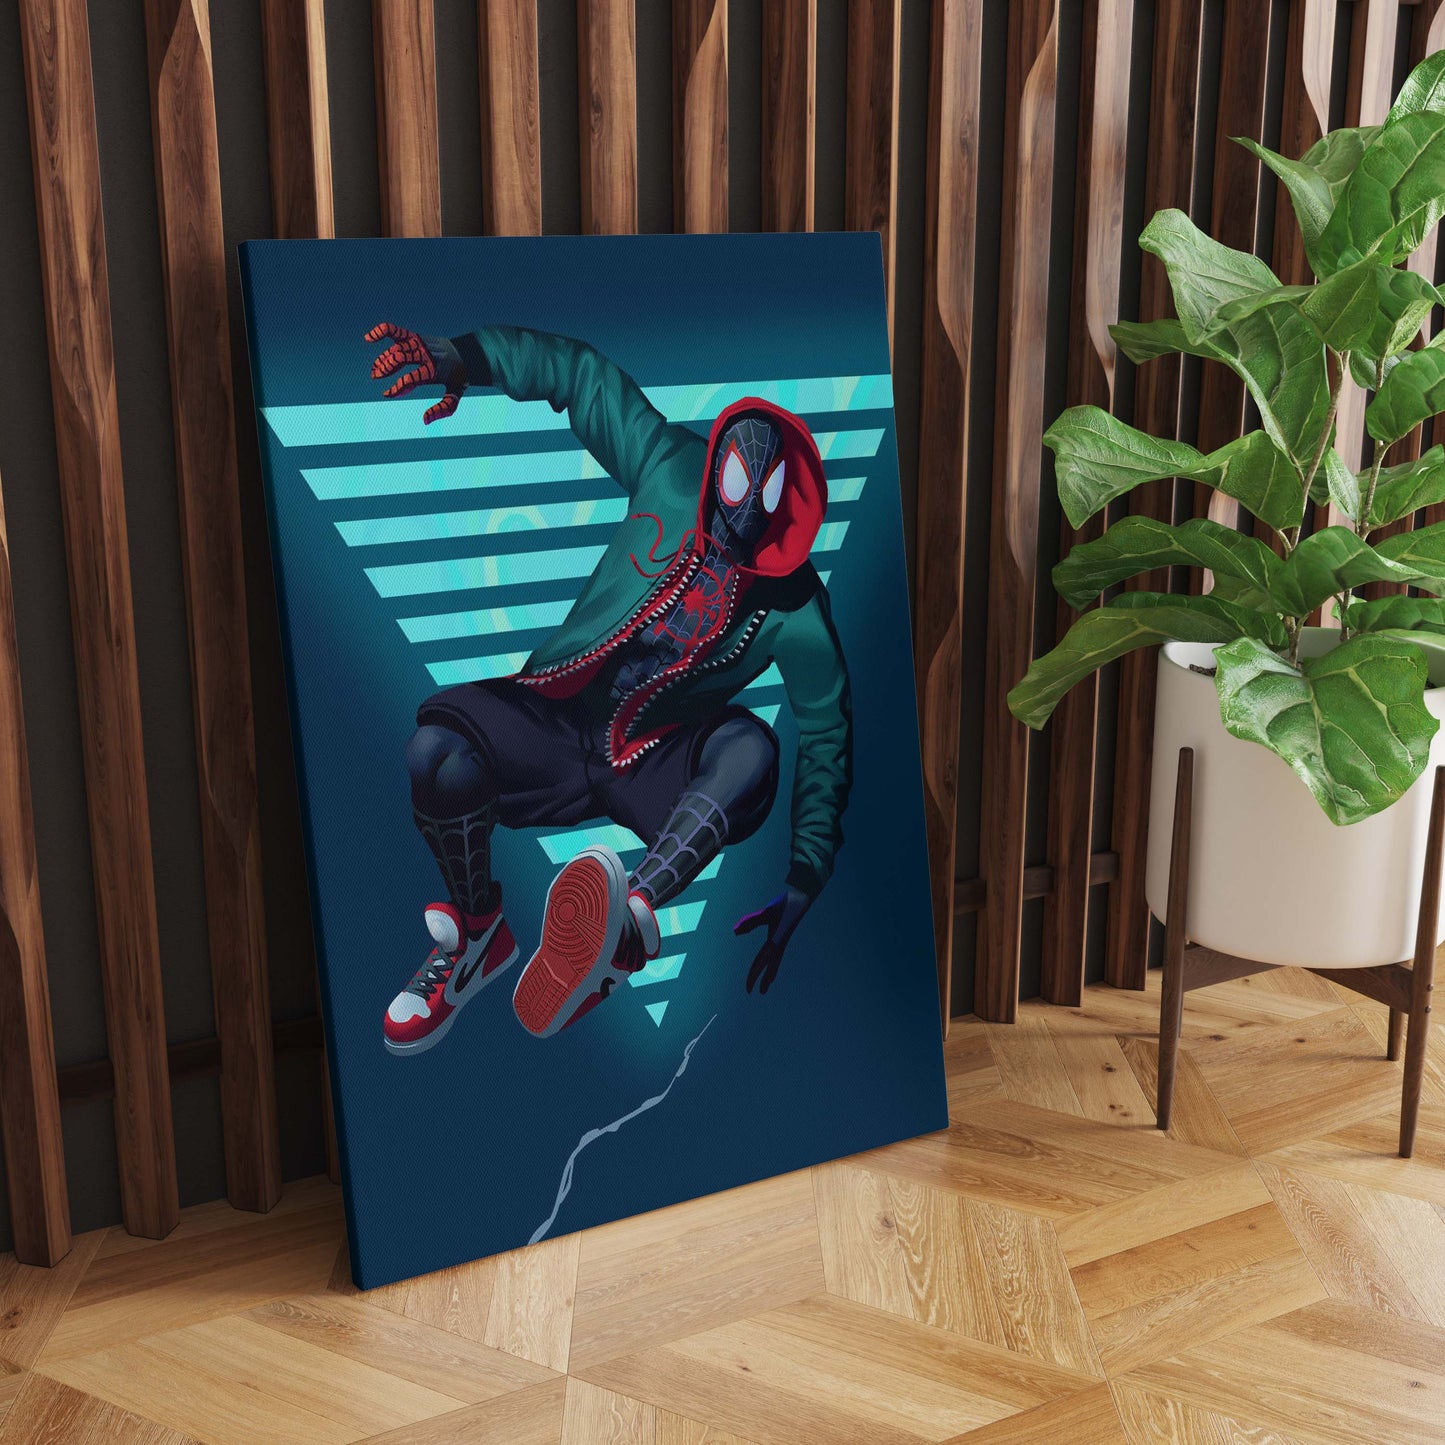 Celestial Swing: Miles Morales Spider-Man in a Tranquil Bluish Dreamscape, Embracing the Multiverse - S05E102